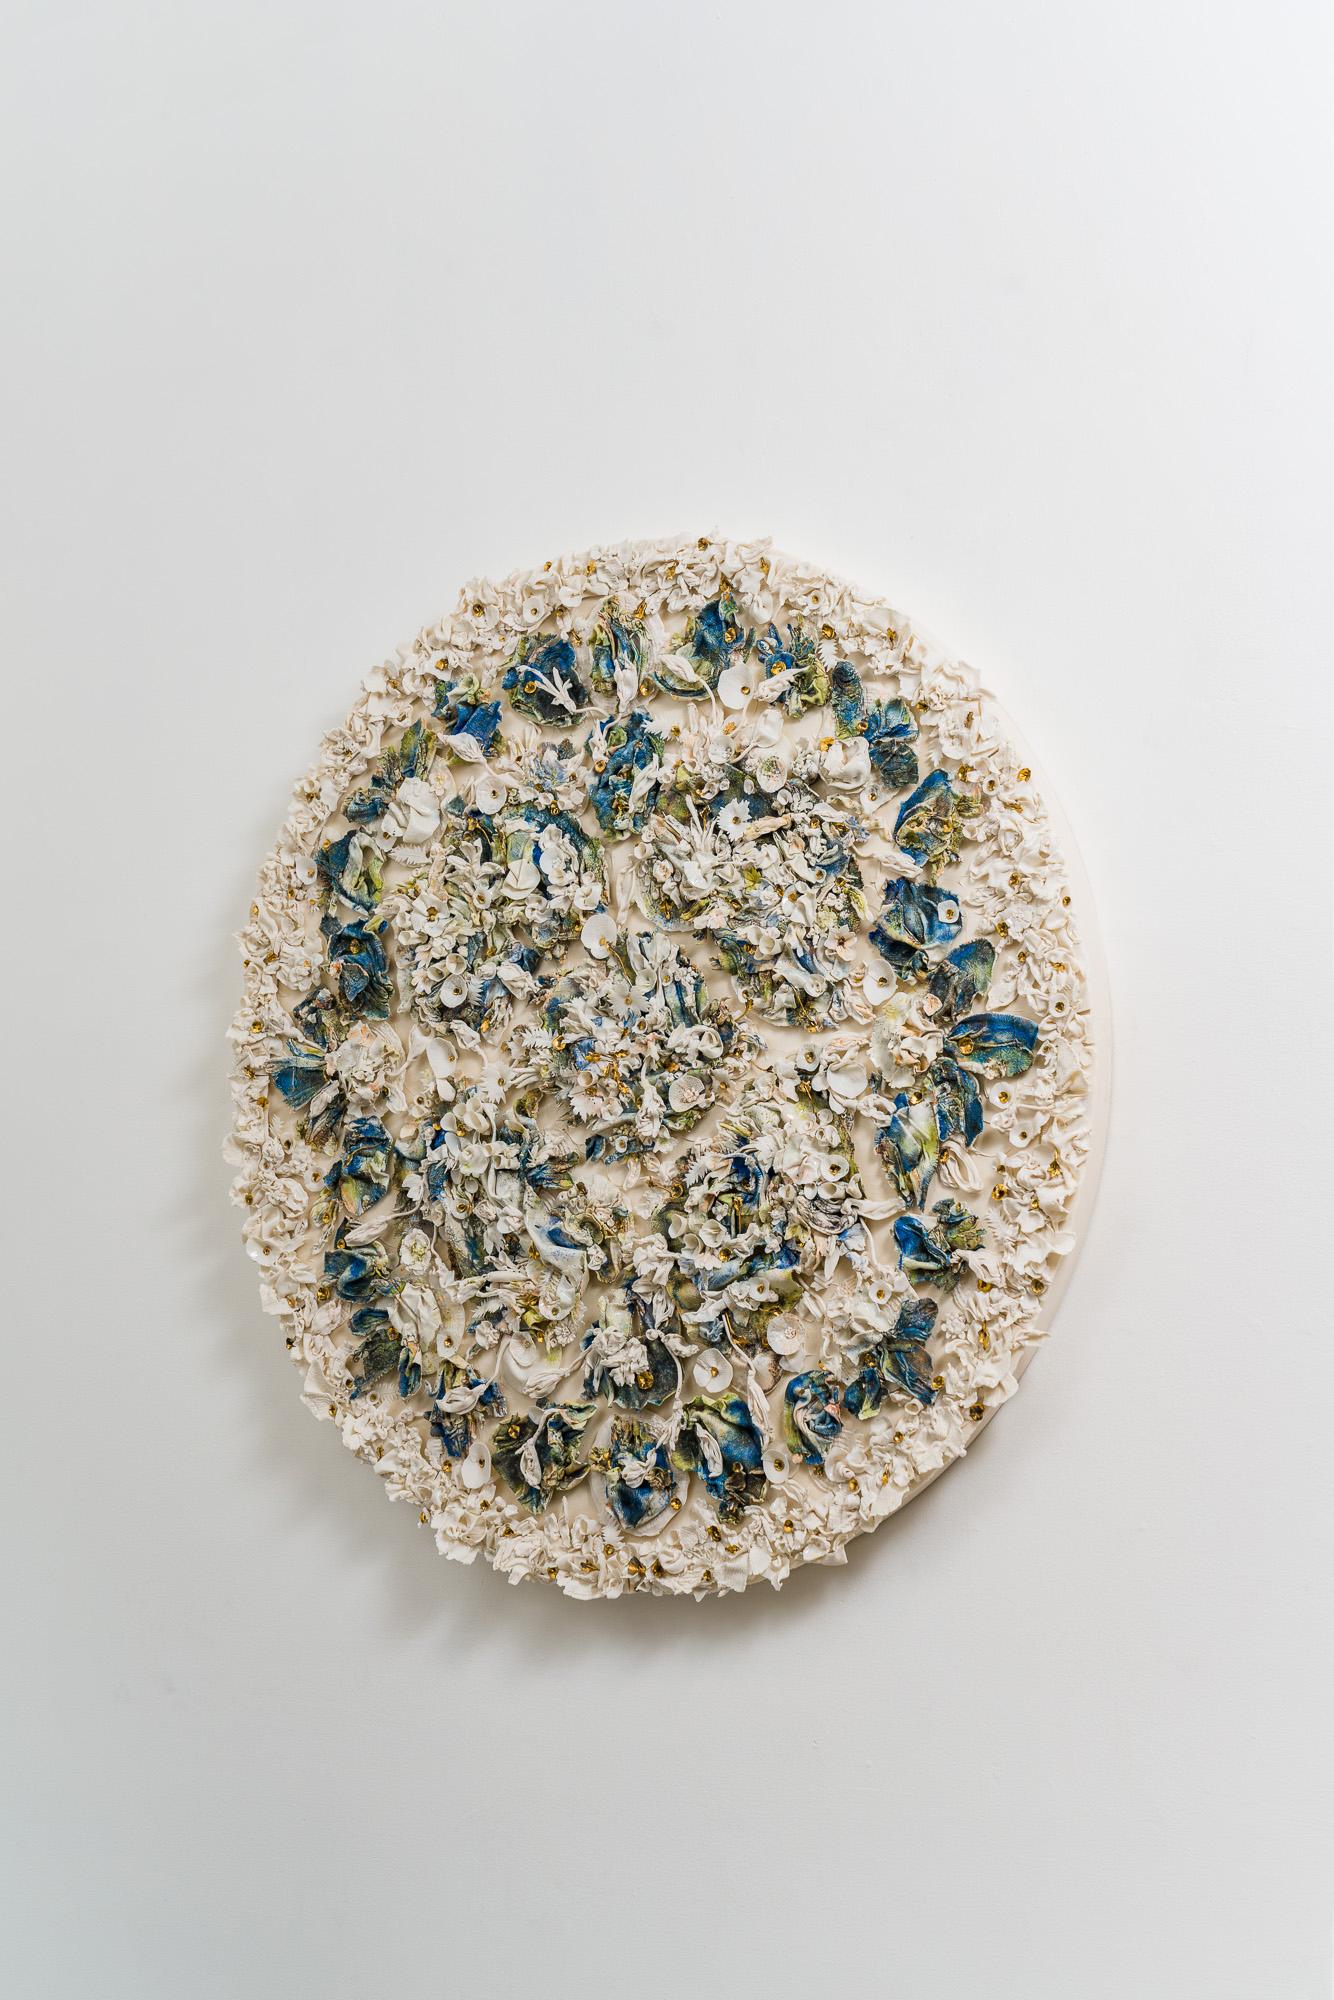 Mindy Horn’s ceramic “Garden Tondo” revisits elements most often seen in her vessels, which are notable for their imperfections, appearing to have grown and then weathered organically. With her most recent ceramic wall medallion, a multitude of